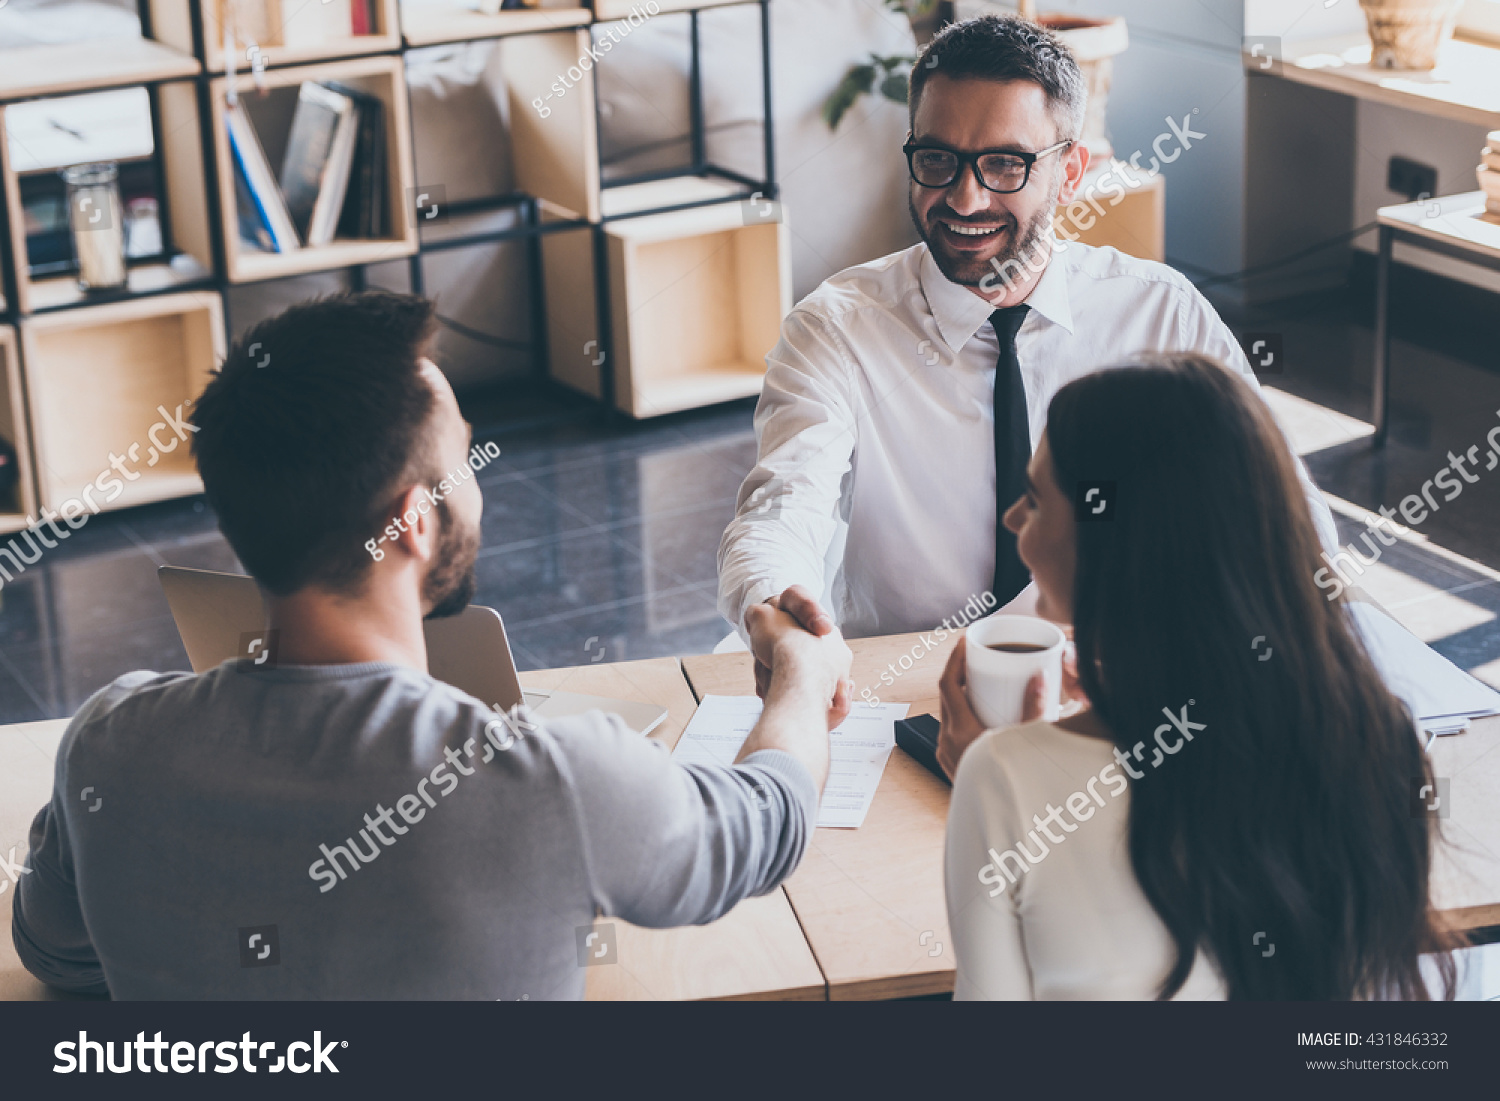 Sealing a deal. Top view of two men sitting at the desk and shaking hands while young woman looking at them and smiling  #431846332